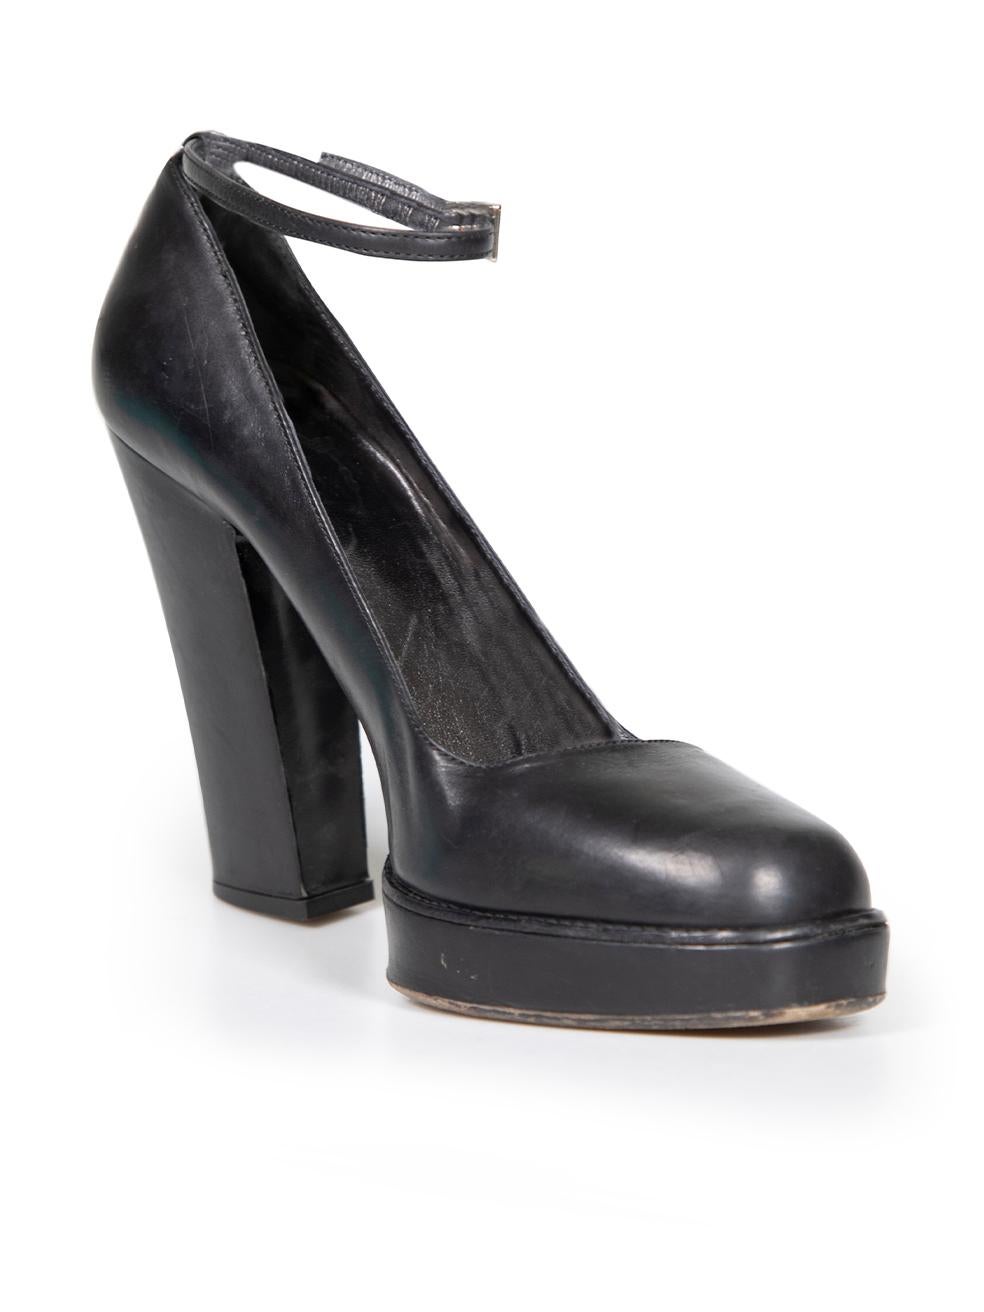 CONDITION is Good. General wear to heels is evident. Moderate signs of creasing to overall leather, as well as scratches and indent to top and heel of both shoes on this used Prada designer resale item.
 
 Details
 Black
 Leather
 Mary Jane heels
